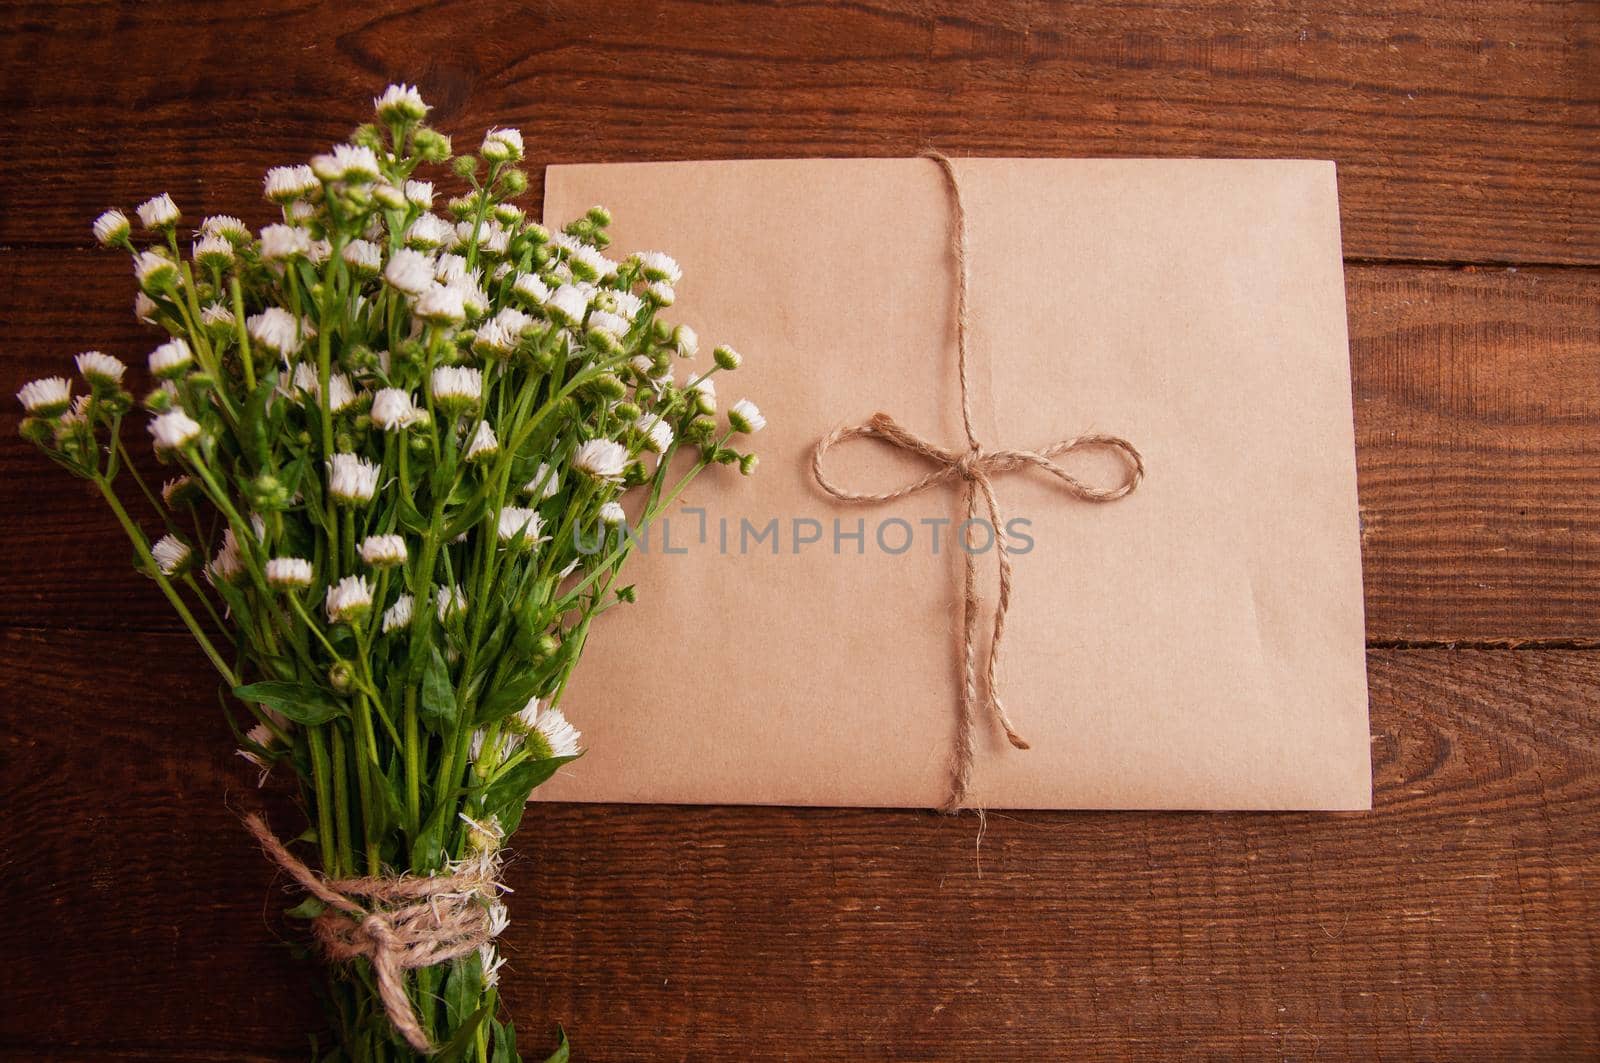 envelope made of craft paper, next to a bouquet of chamomile flowers, which lies on a wooden table